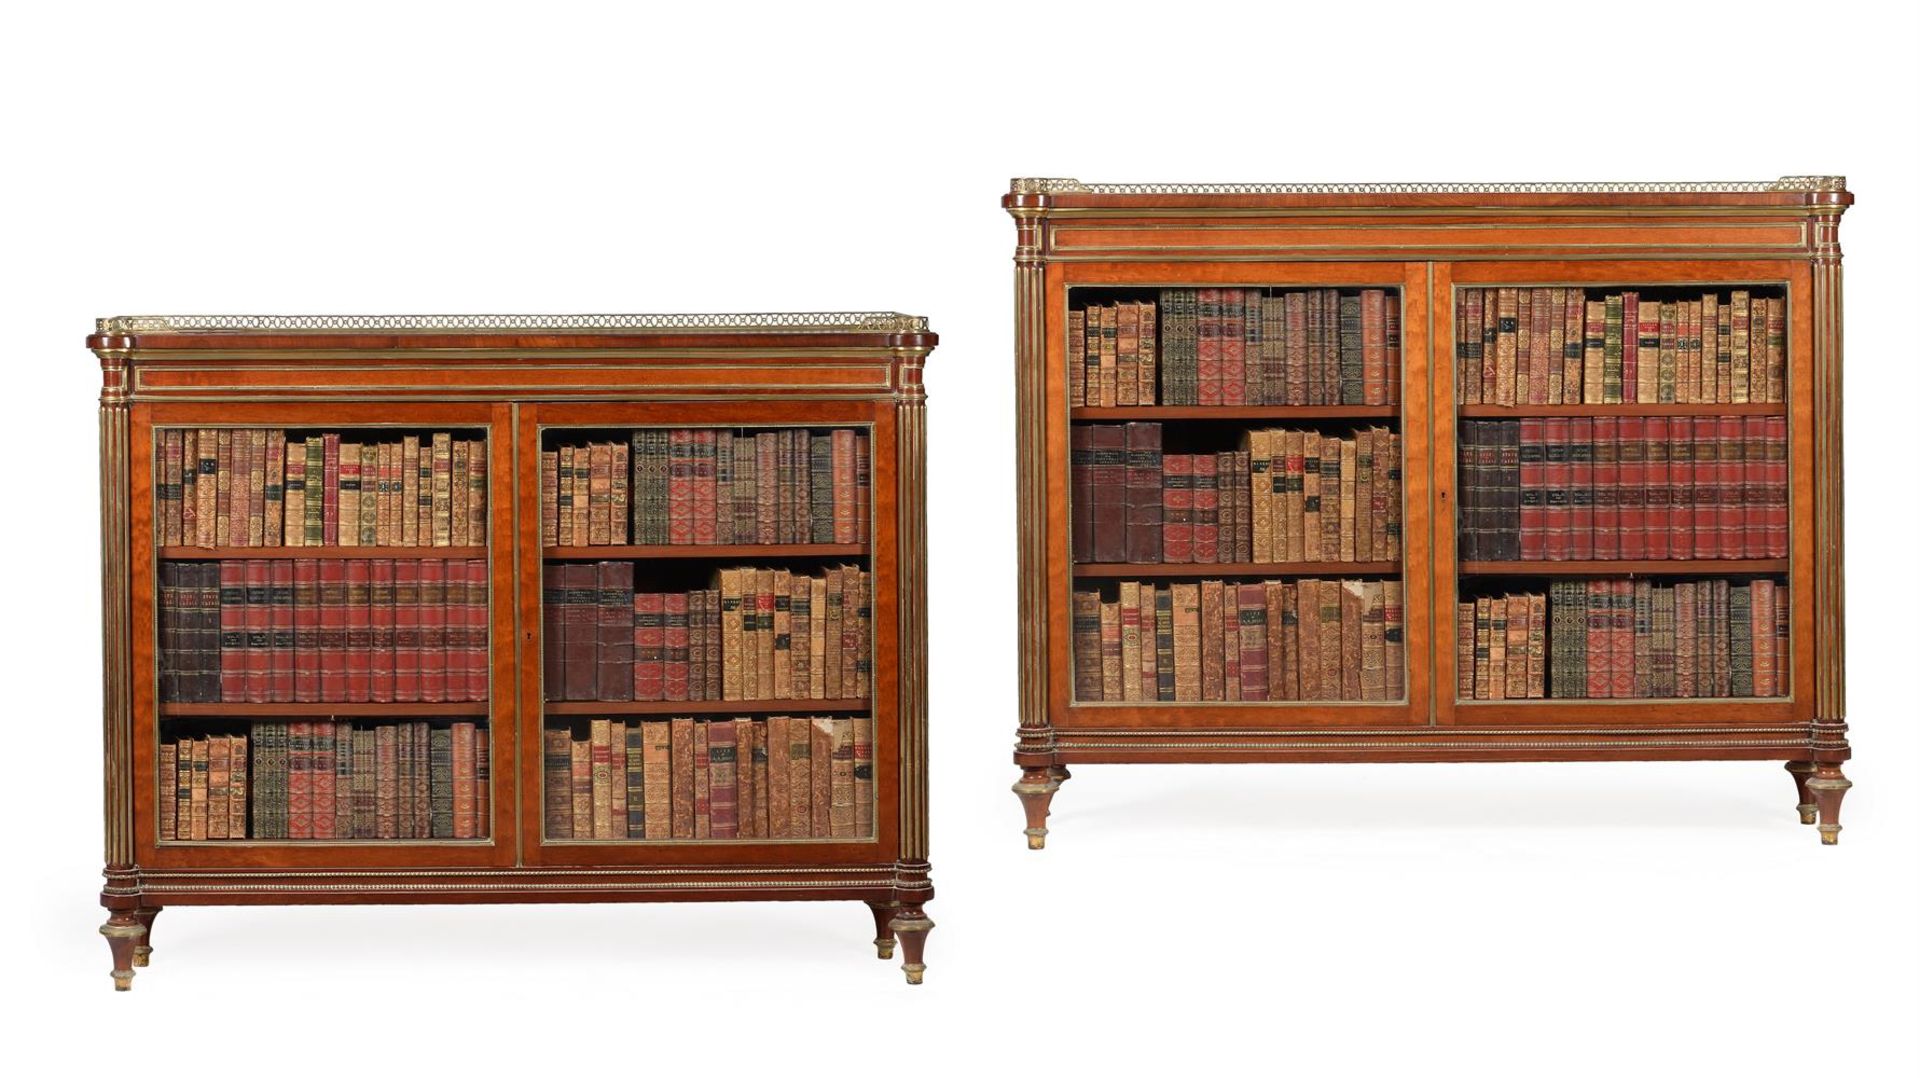 A PAIR OF FIGURED MAHOGANY AND BRASS MOUNTED CABINETS, 19TH OR EARLY 20TH CENTURY